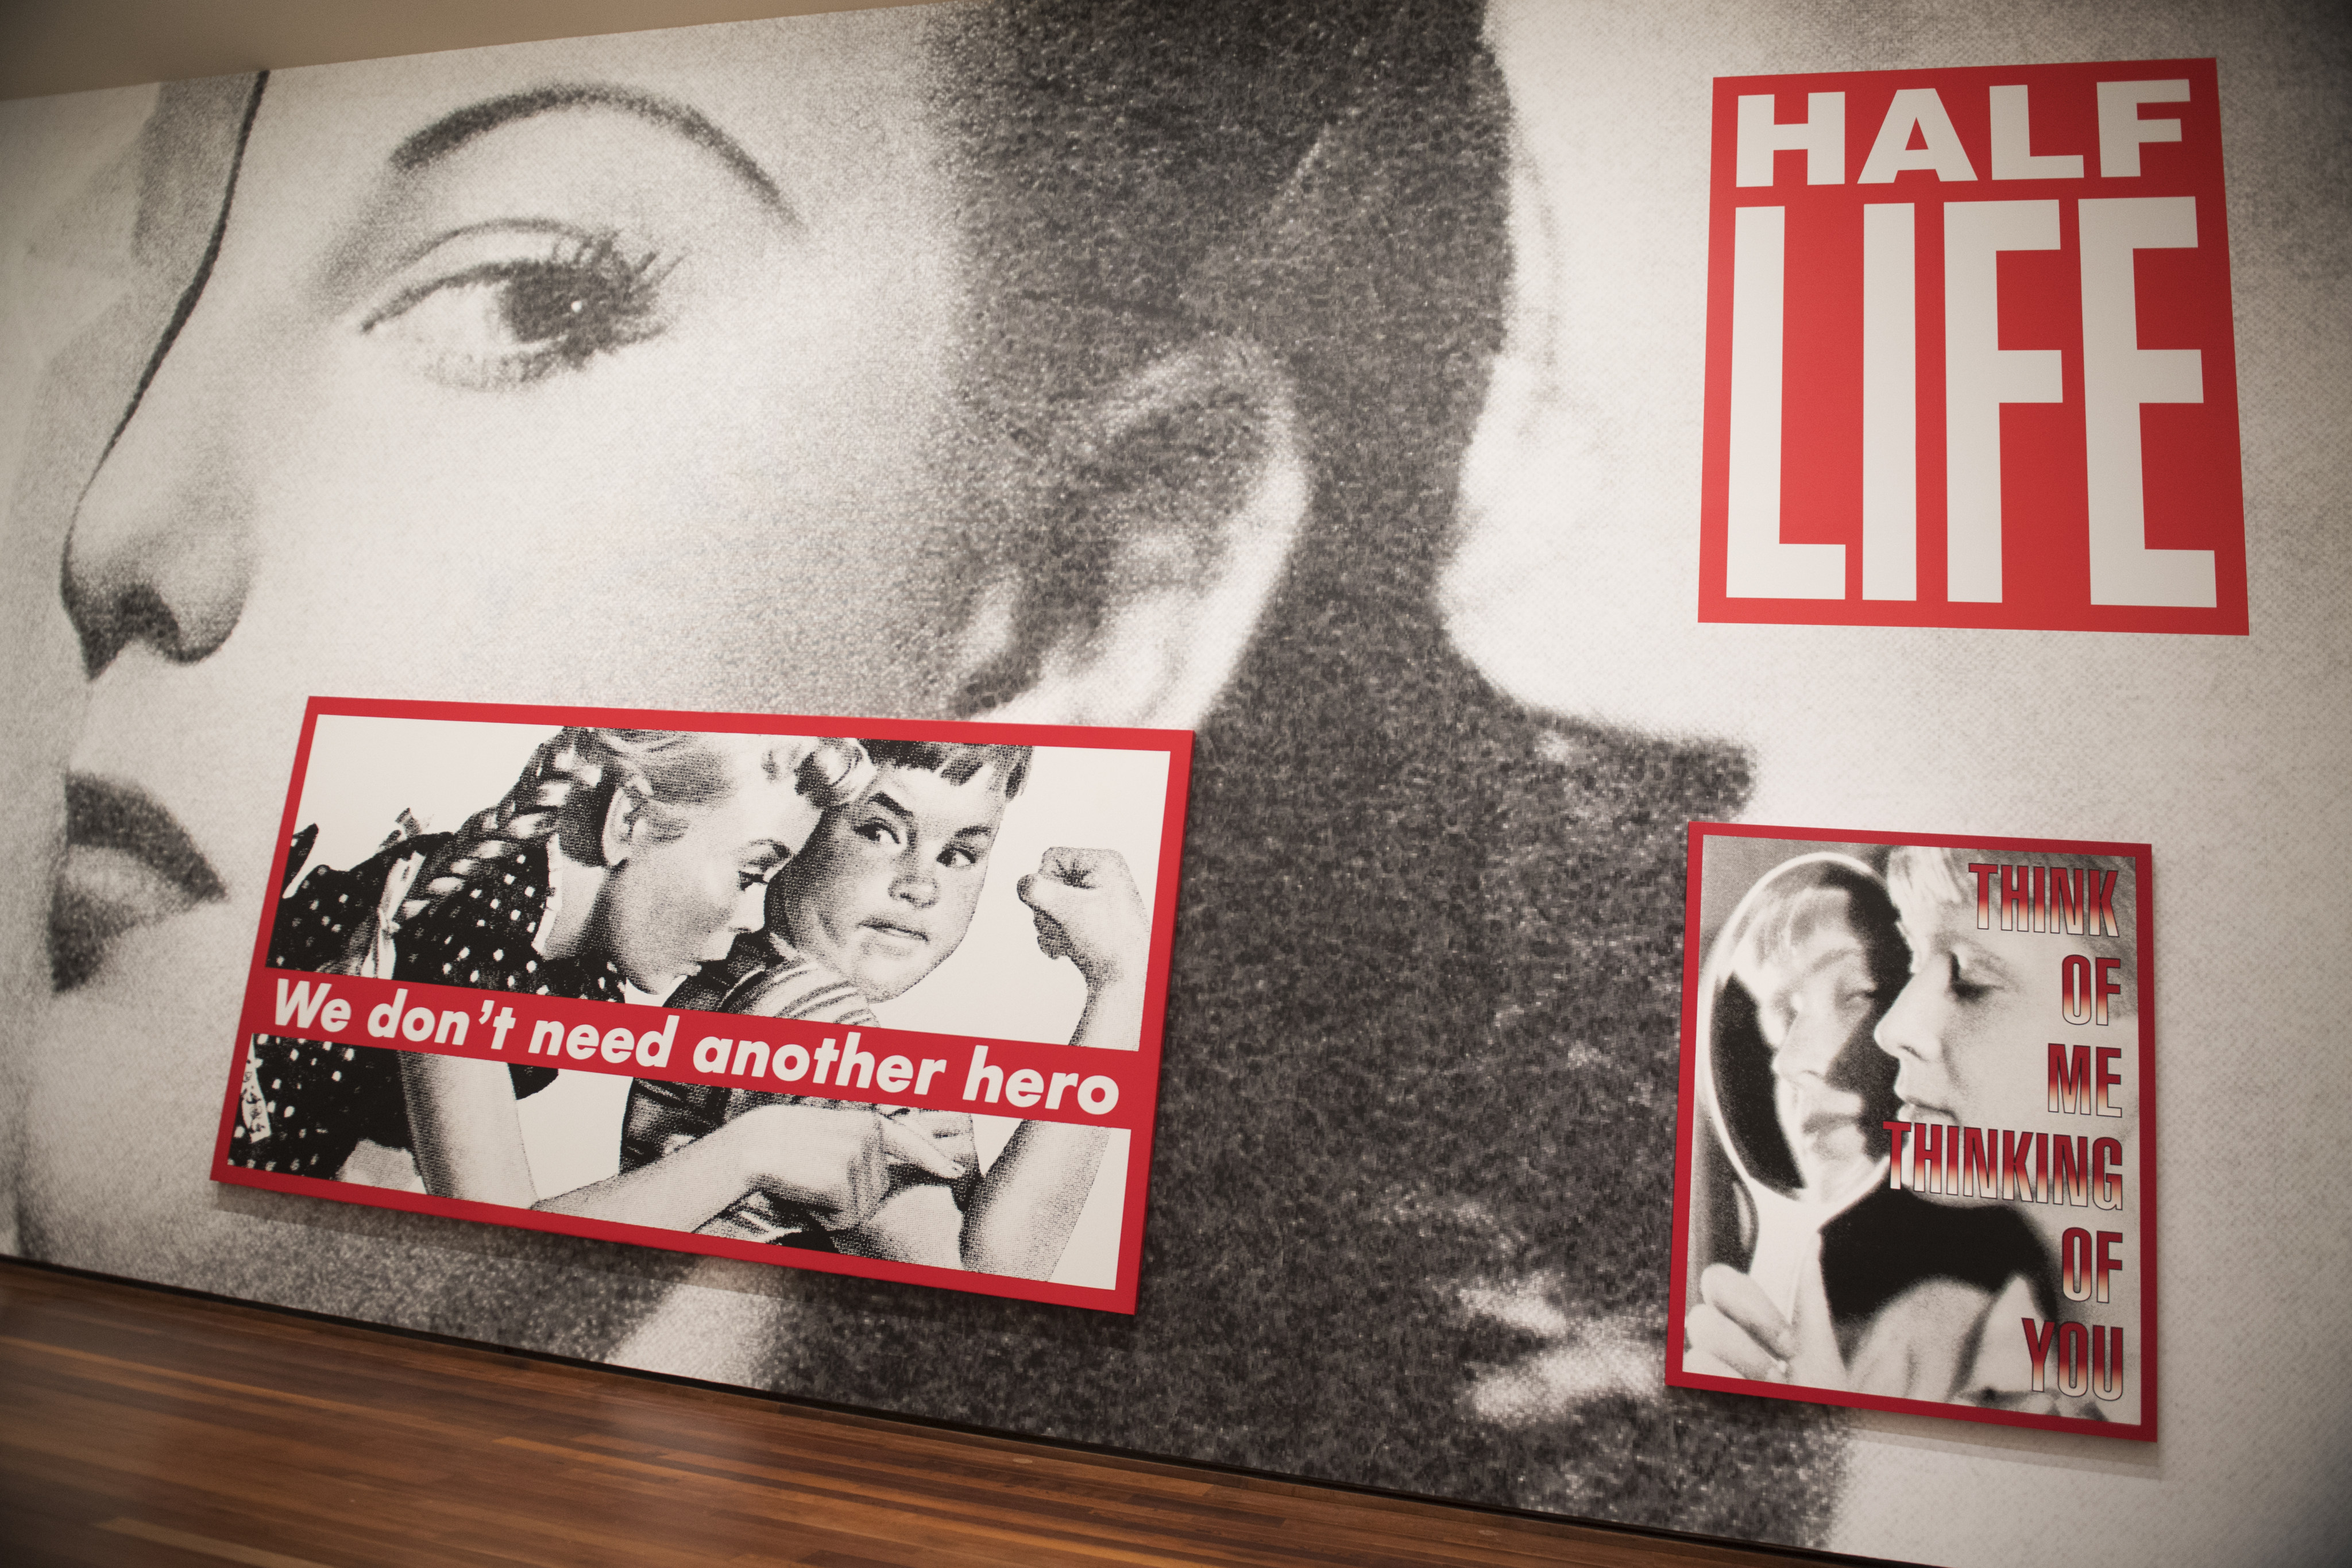 Works by American artist Barbara Kruger on display at the National Gallery of Art - East Building in Washington on September 27, 2016. Photo: Getty Images